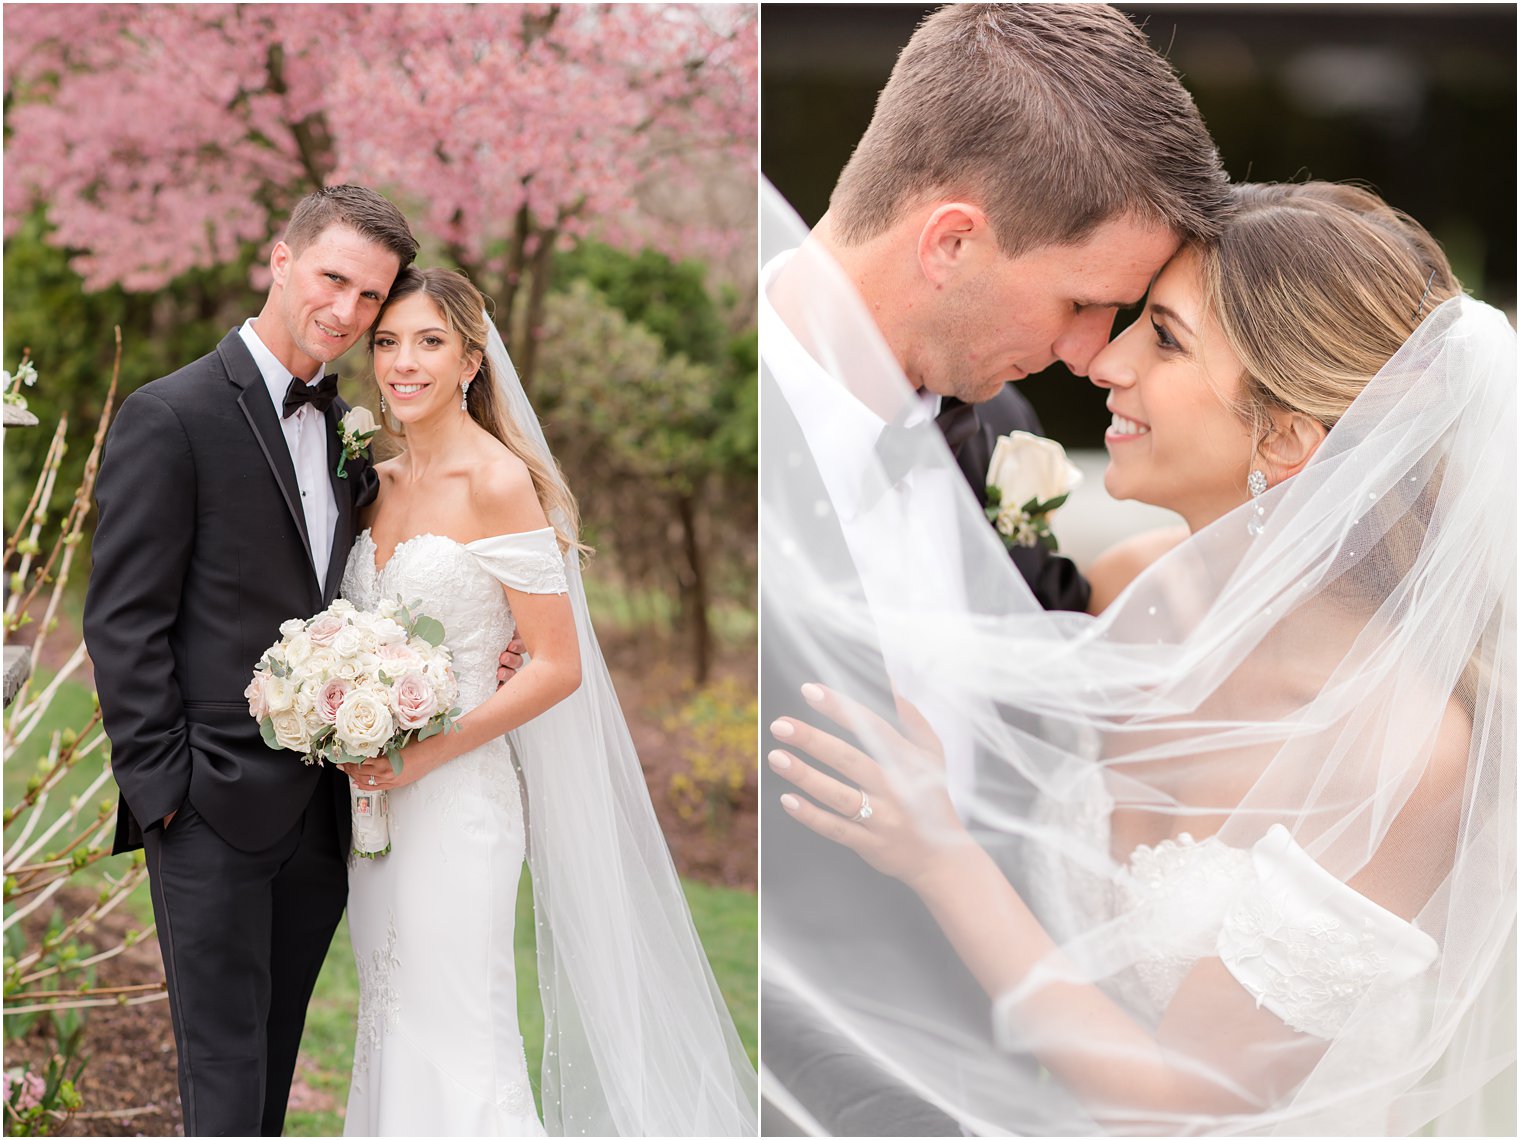 bride and groom pose with bride's veil draped around their shoulders during spring Park Savoy Estate wedding